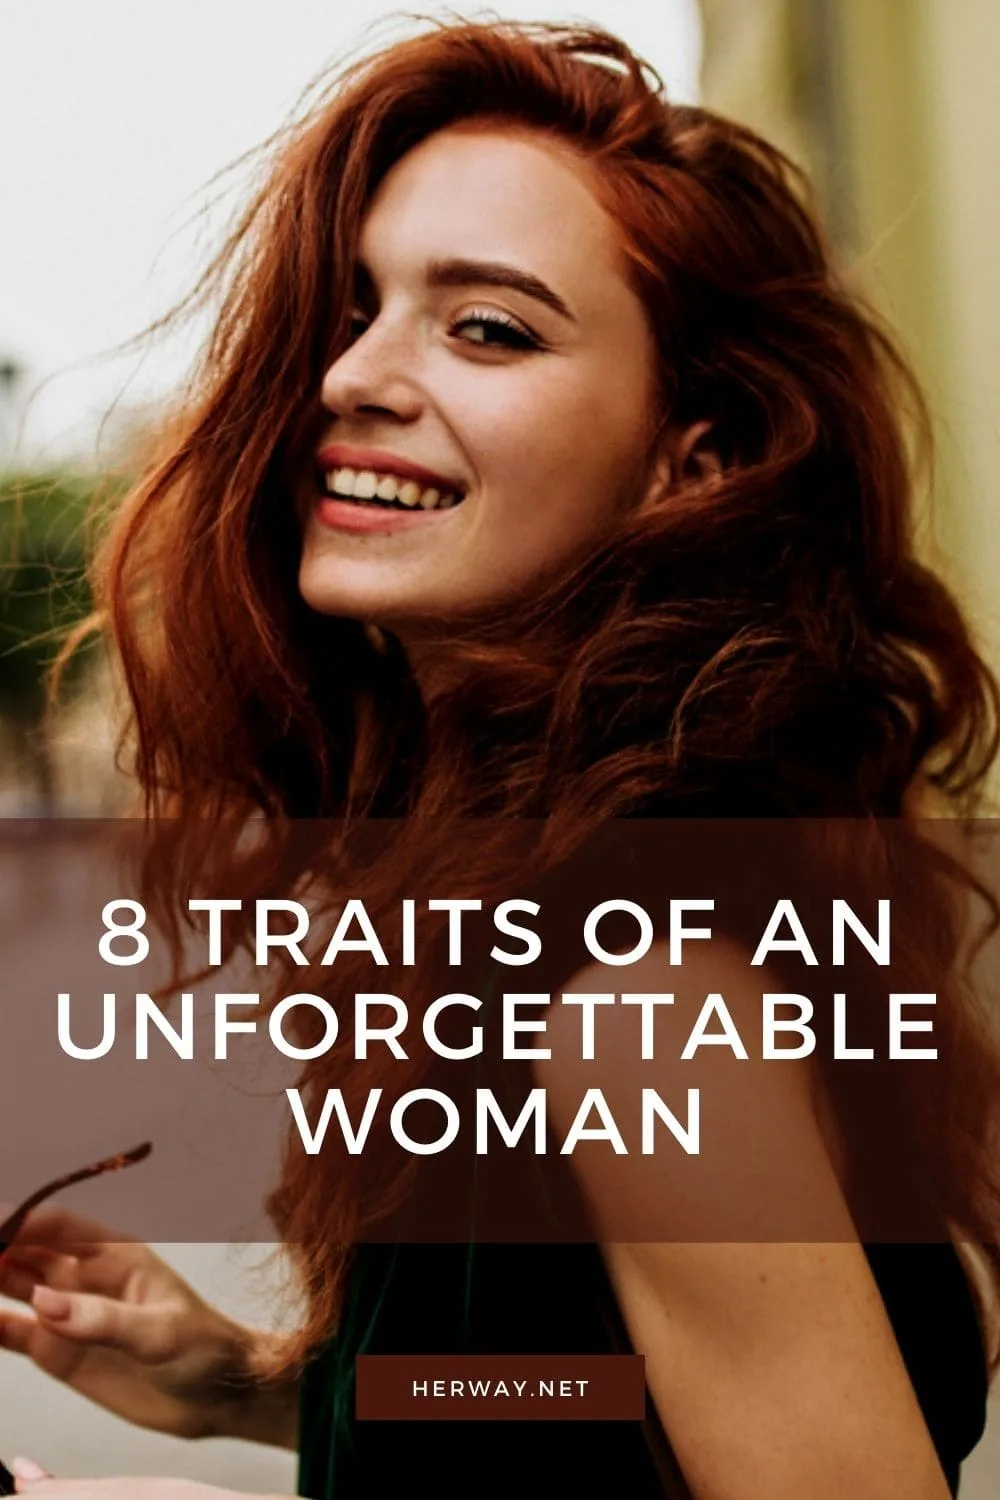 8 Traits Of An Unforgettable Woman